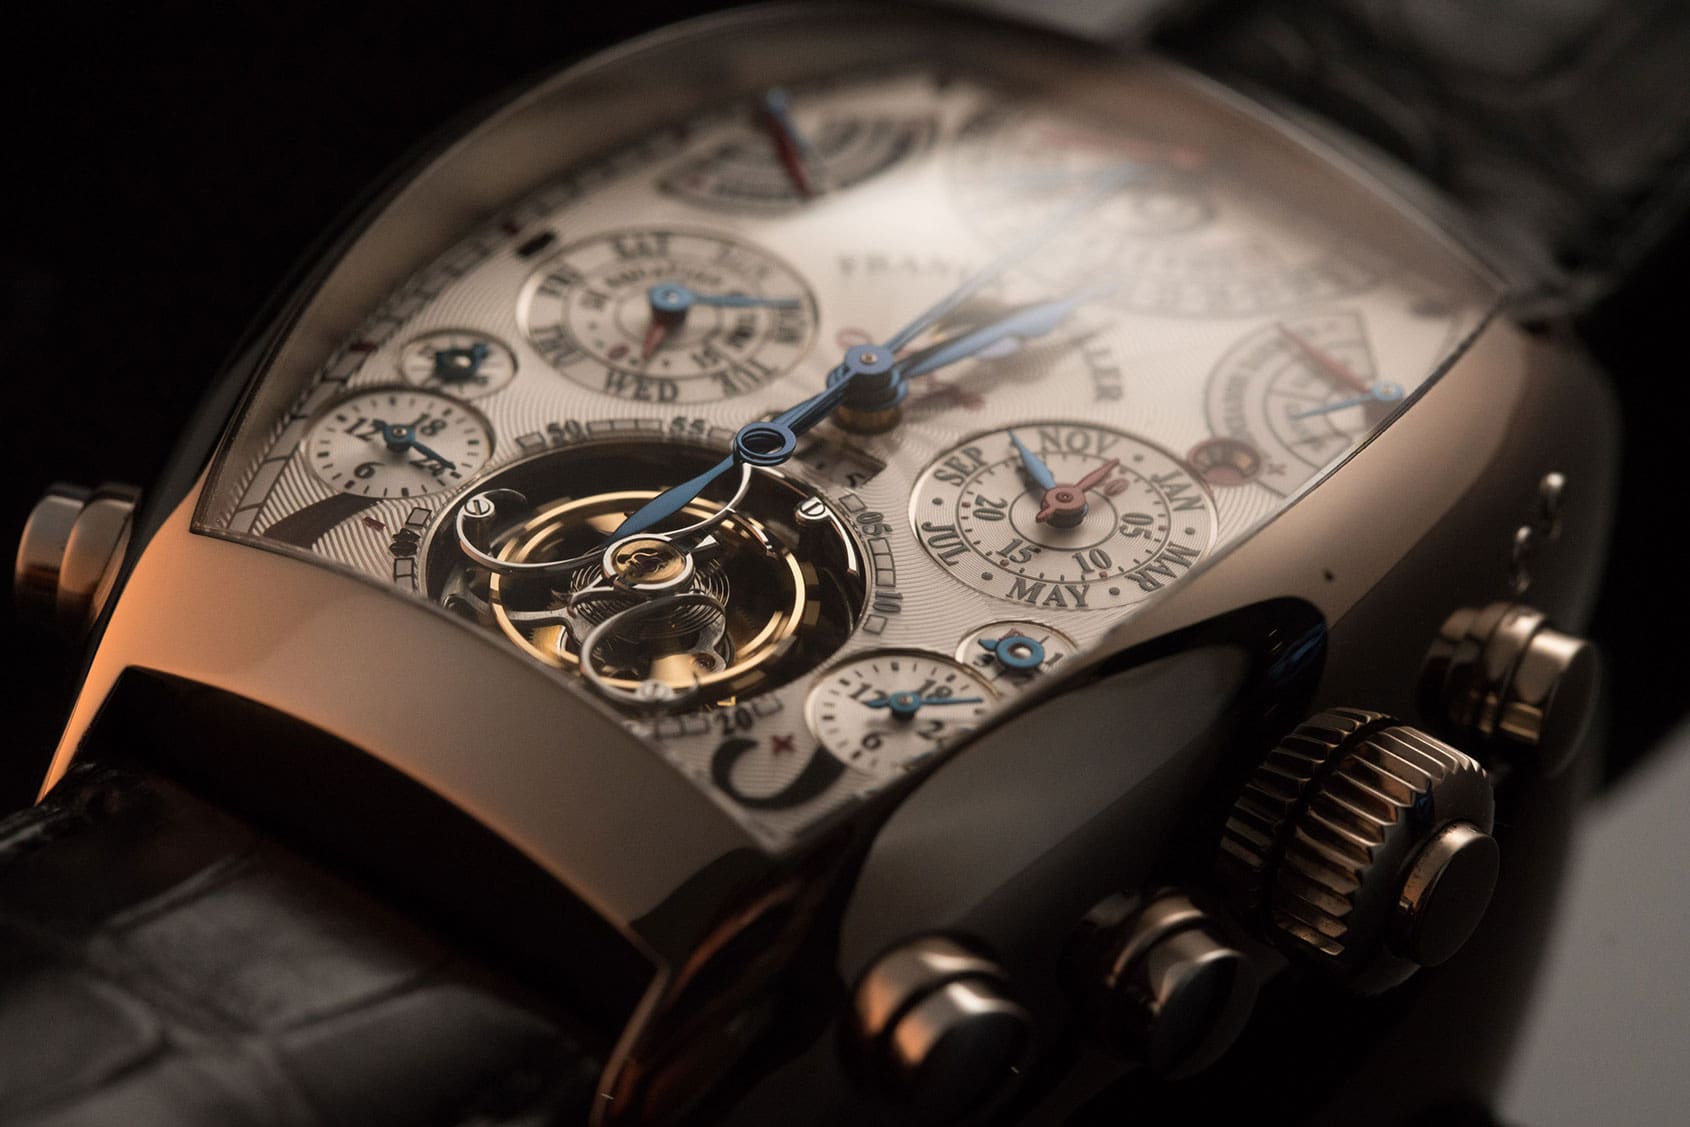 VIDEO: The most complicated watch in the world – the Franck Muller Aeternitas Mega